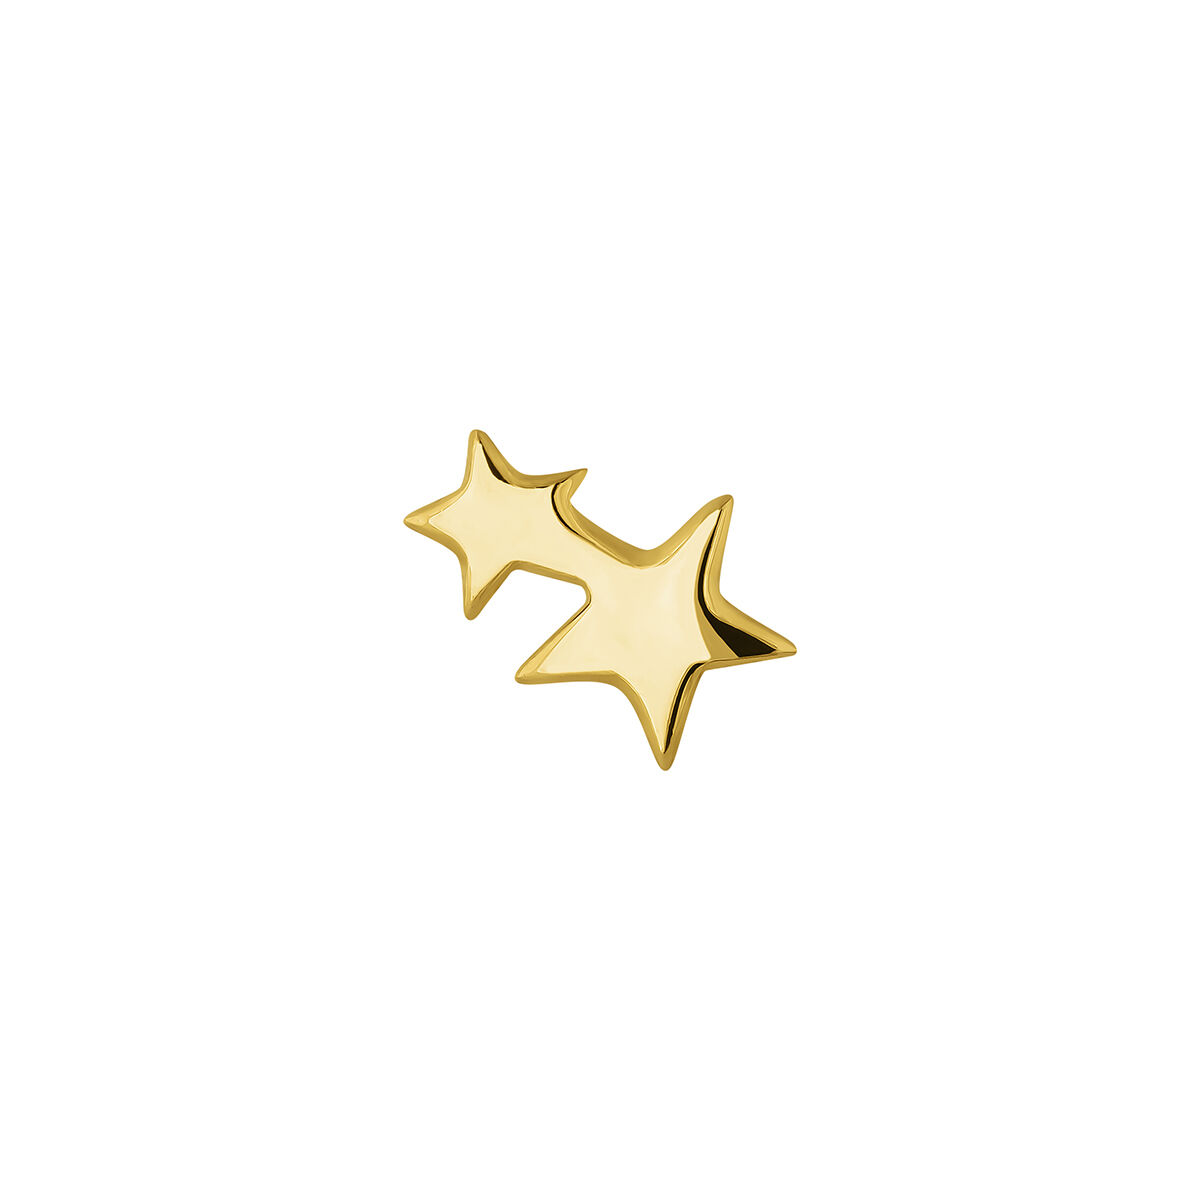 18 kt yellow gold-plated sterling silver stars single earring, J04815-02-H, hi-res